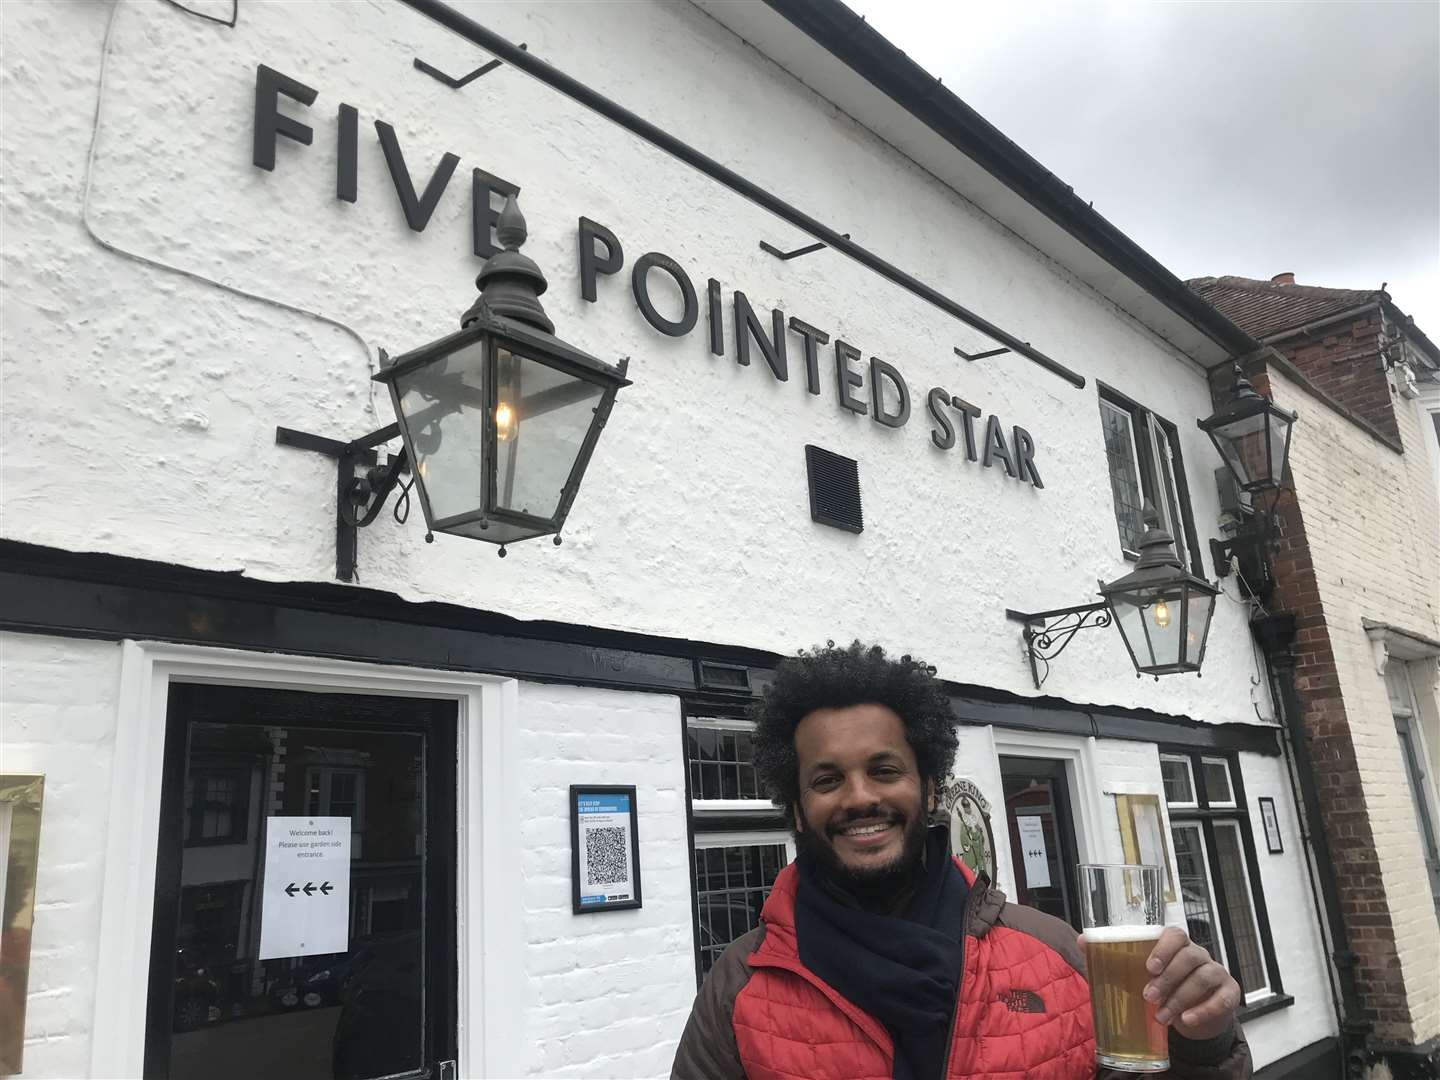 Tom, landlord of the Five Pointed Star